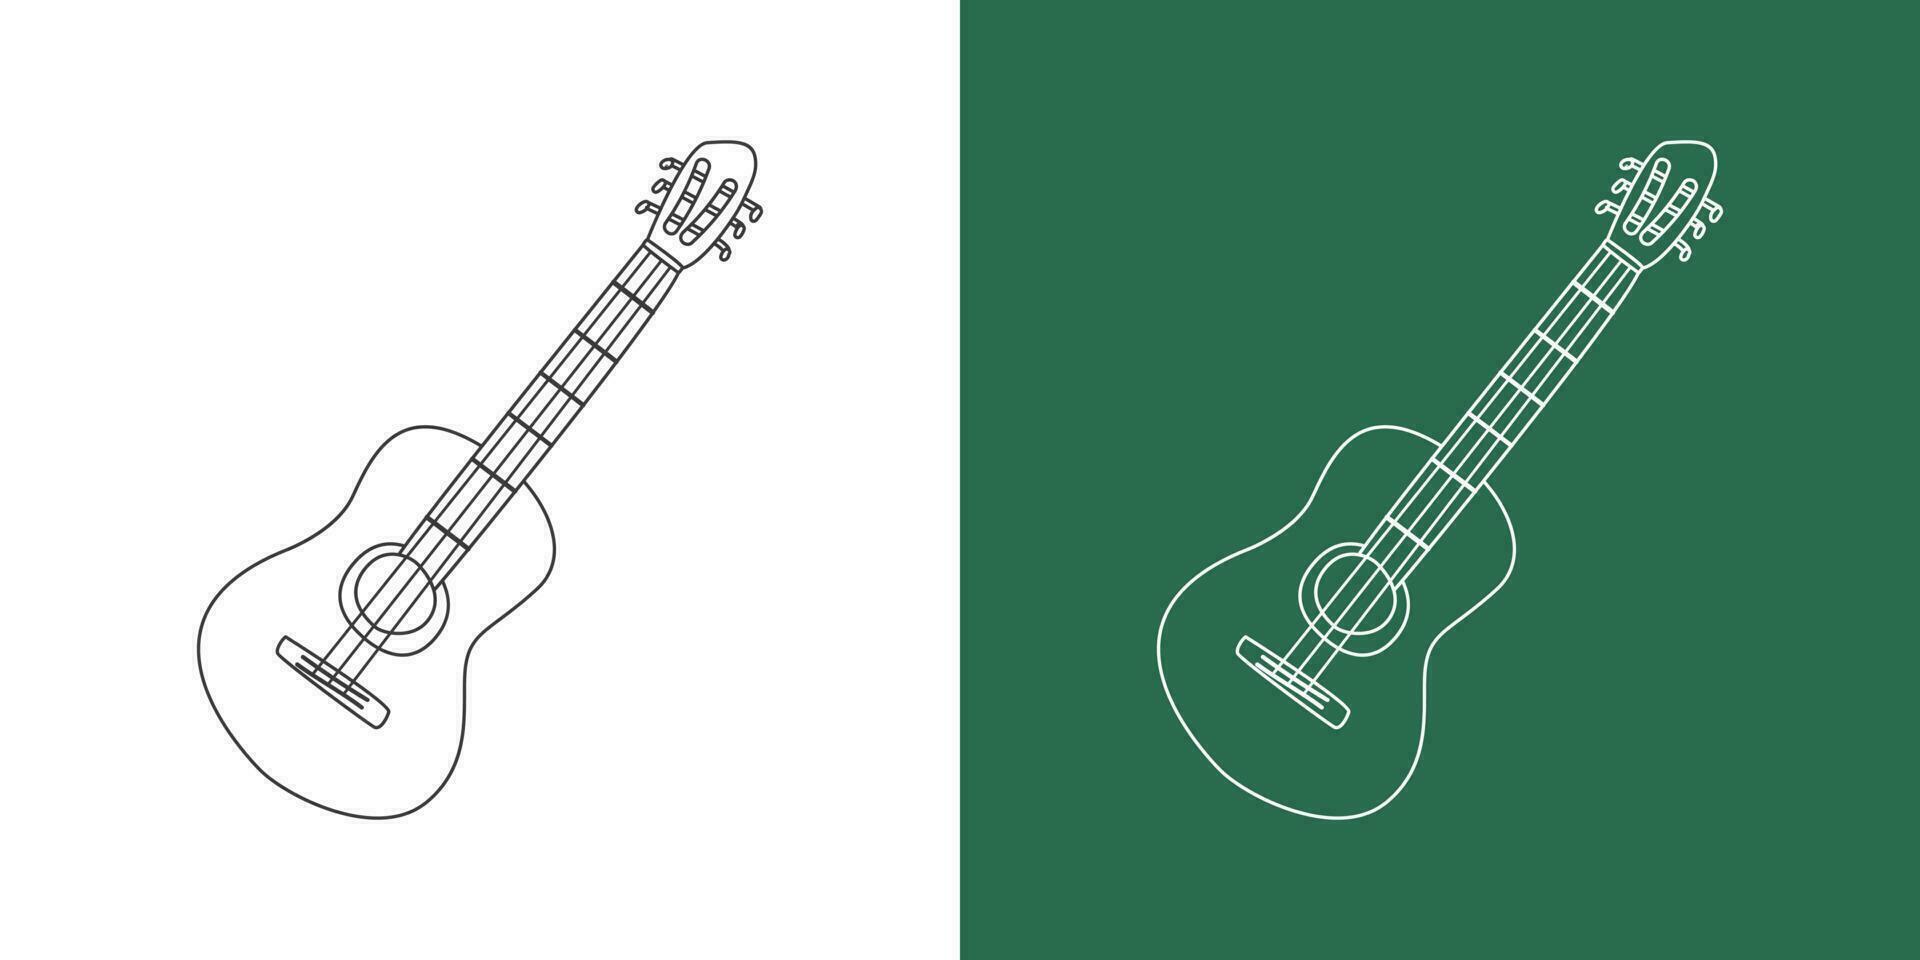 Classic guitar line drawing cartoon style. String instrument guitar clipart drawing in linear style isolated on white and chalkboard background. Musical instrument clipart concept, vector design